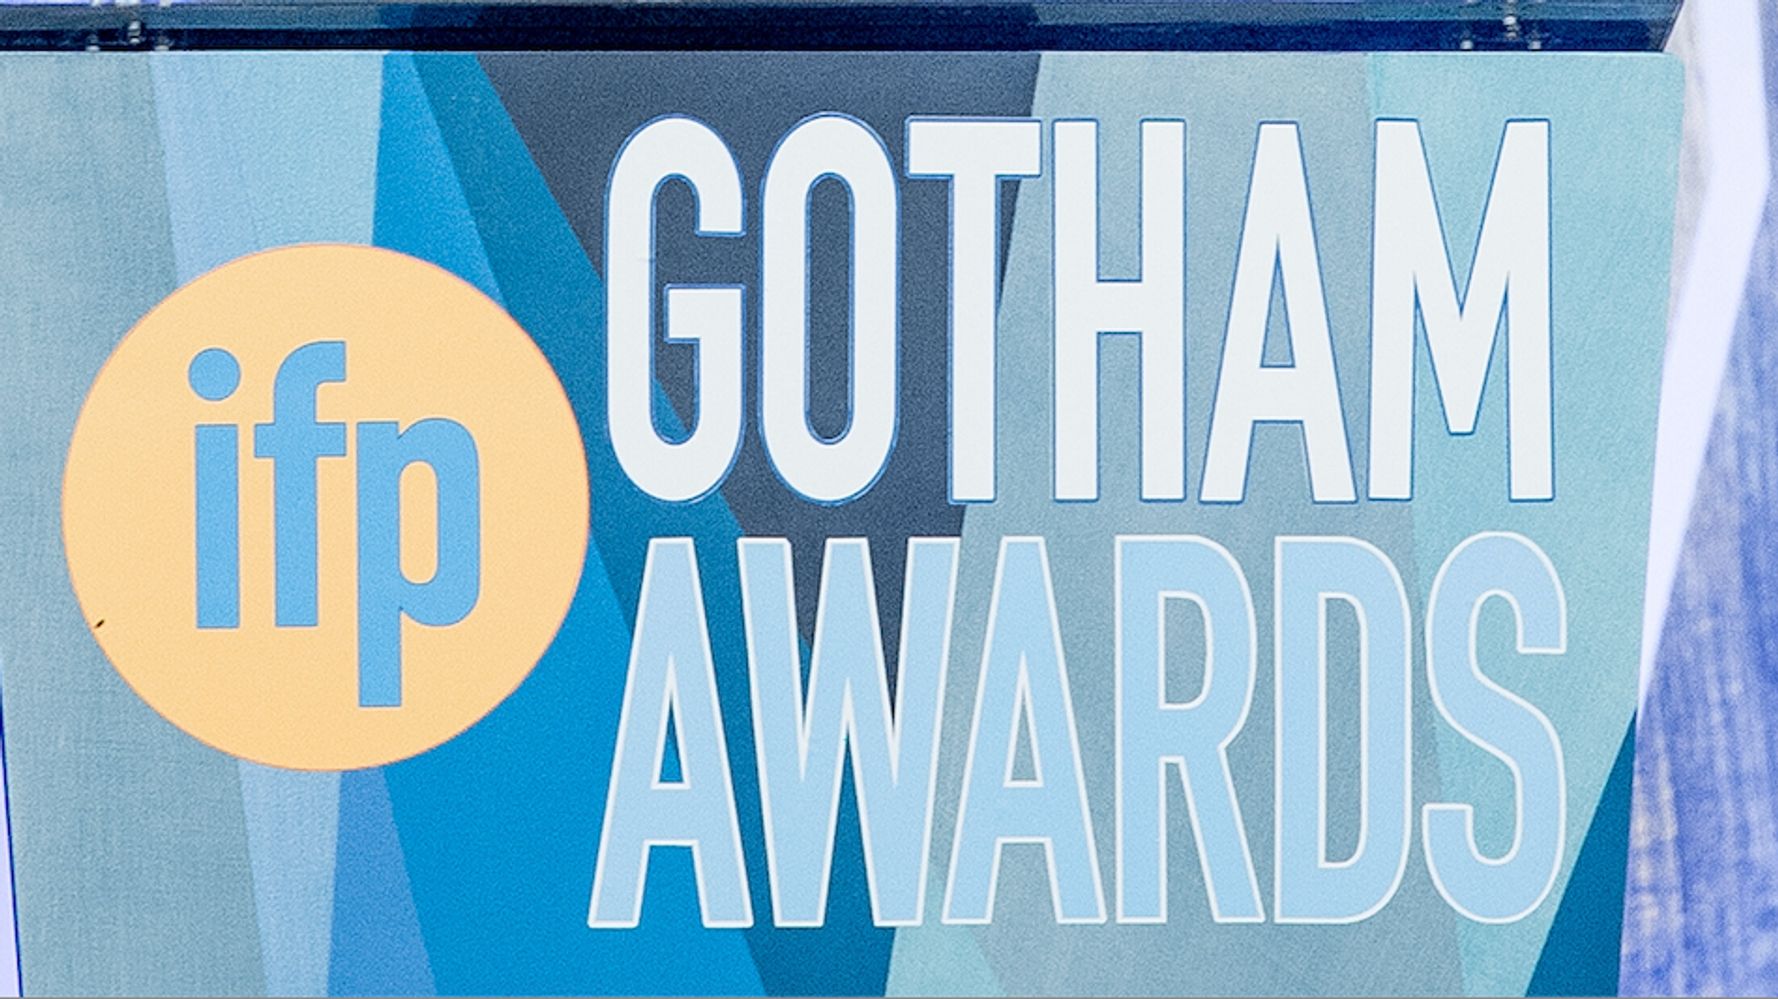 Gotham Awards To Shift To Gender-Neutral Acting Awards